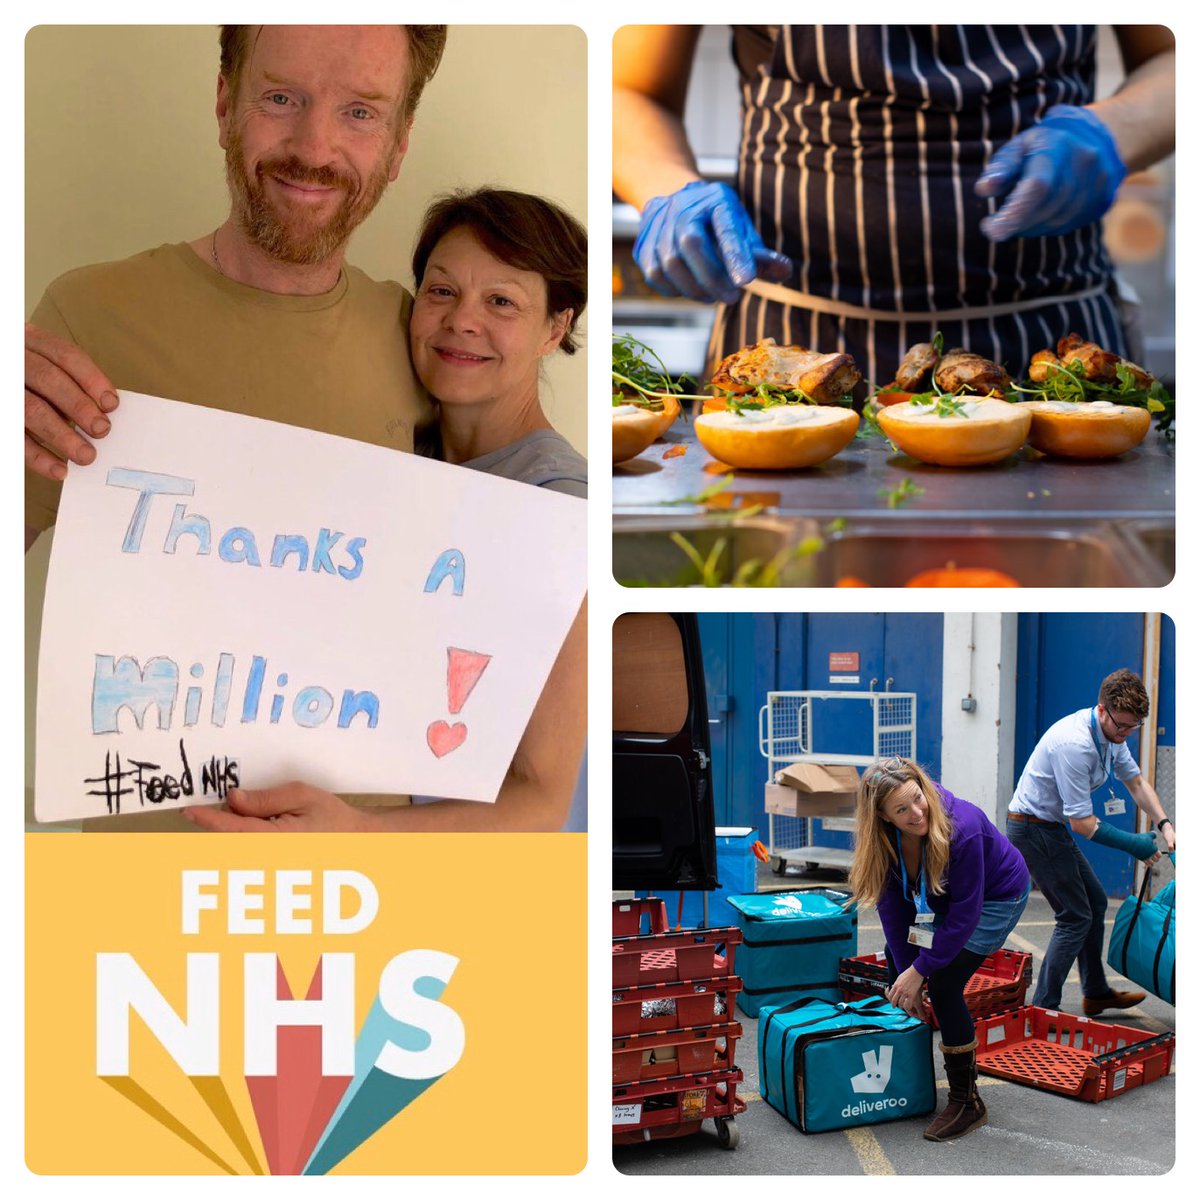 @FeedNhs was started by @leonrestaurants, supported by Helen McCrory, @lewis_damian & @RealMattLucas, to ensure NHS staff get at least one hot, healthy meal a day. We're talking to @JohnV_LEON about it & celebrating other amazing #Covid19 food initiatives from 12:30 @BBCRadio4!